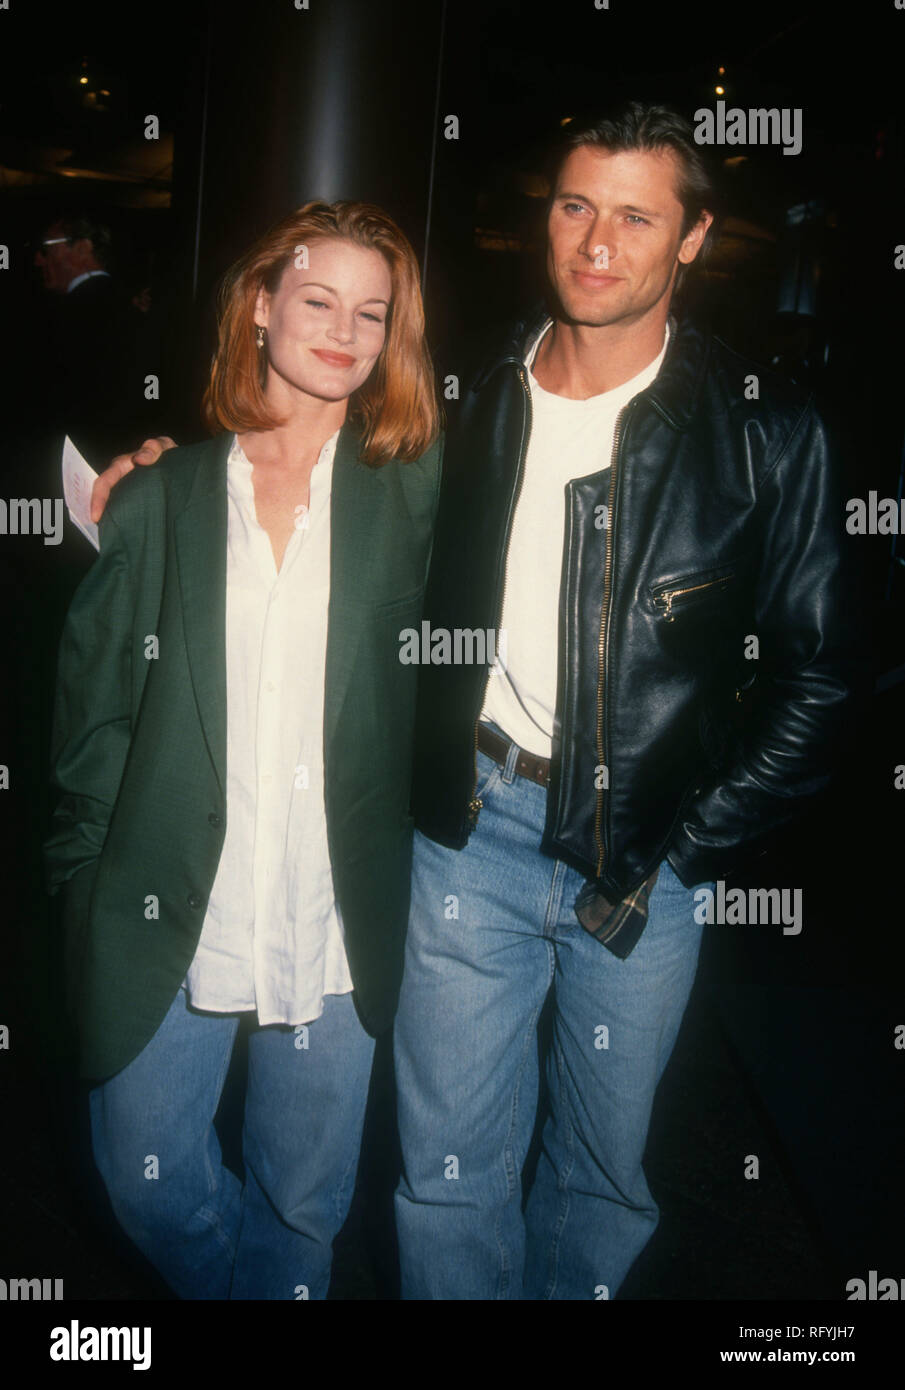 LOS ANGELES, CA - NOVEMBER 17: Actress Laura Leighton and actor Grant Show attend 'The Piano' Premiere on November 17, 1993 at the DGA Theatre in Los Angeles, California. Photo by Barry King/Alamy Stock Photo Stock Photo